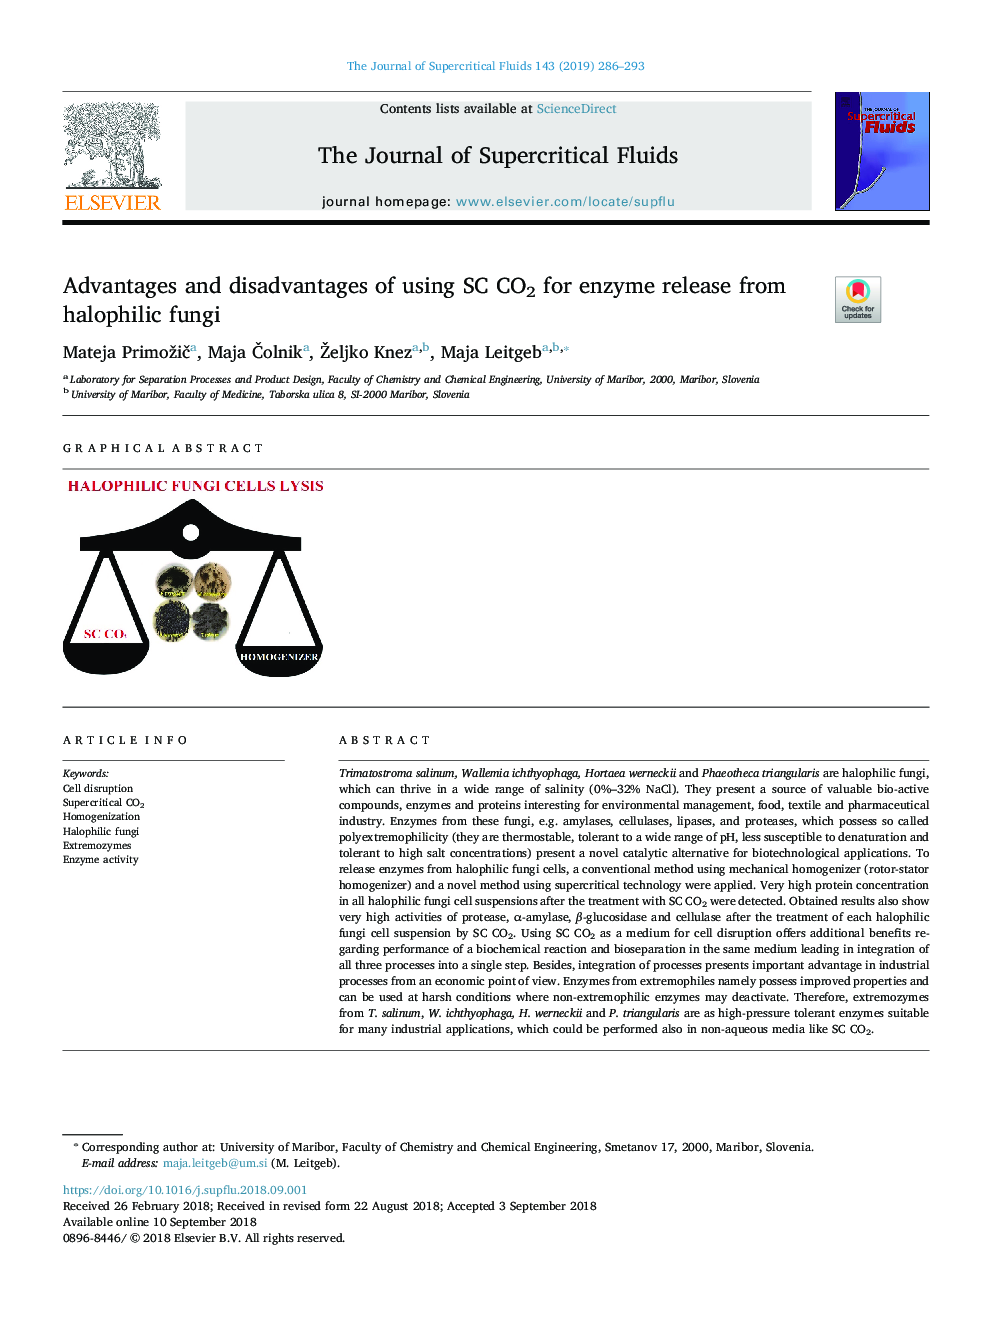 Advantages and disadvantages of using SC CO2 for enzyme release from halophilic fungi